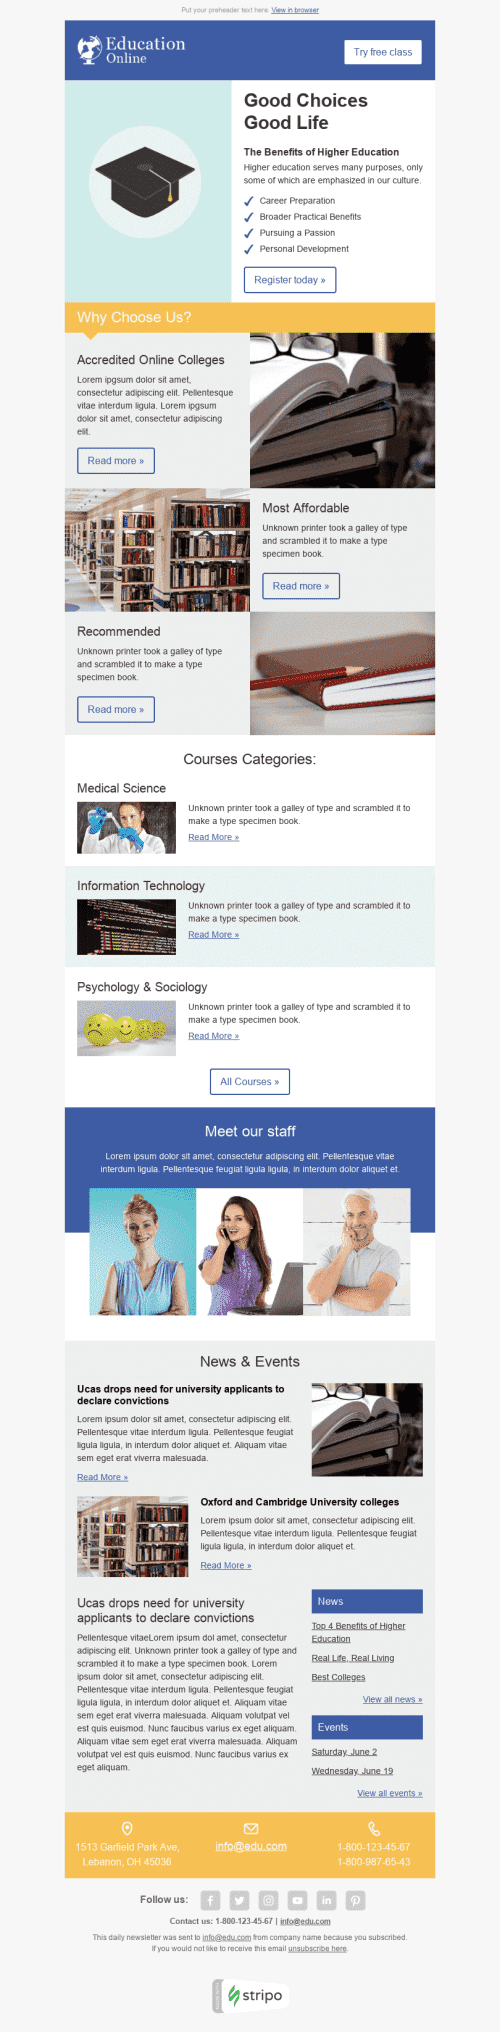 Promo Email Template "Good Choices" for Education industry desktop view